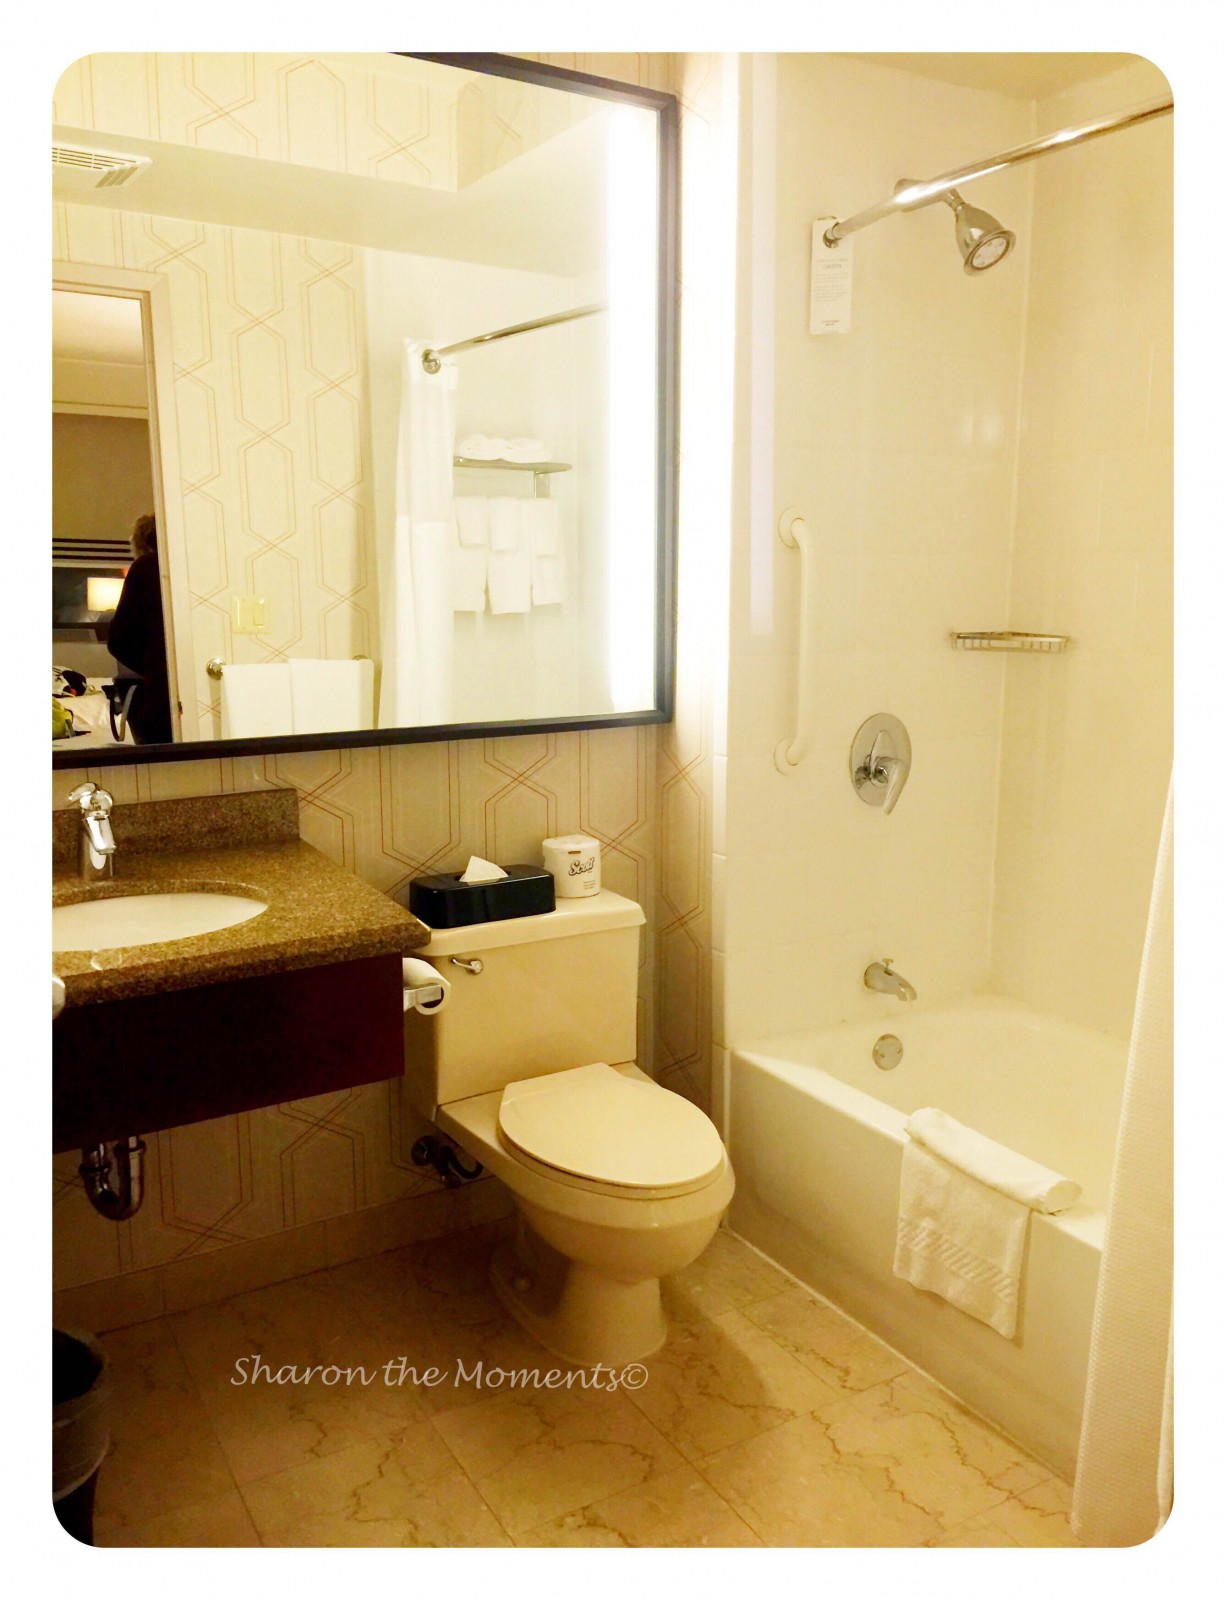 Courtyard by Marriott in New York City Great Location| Sharon the Moments Blog